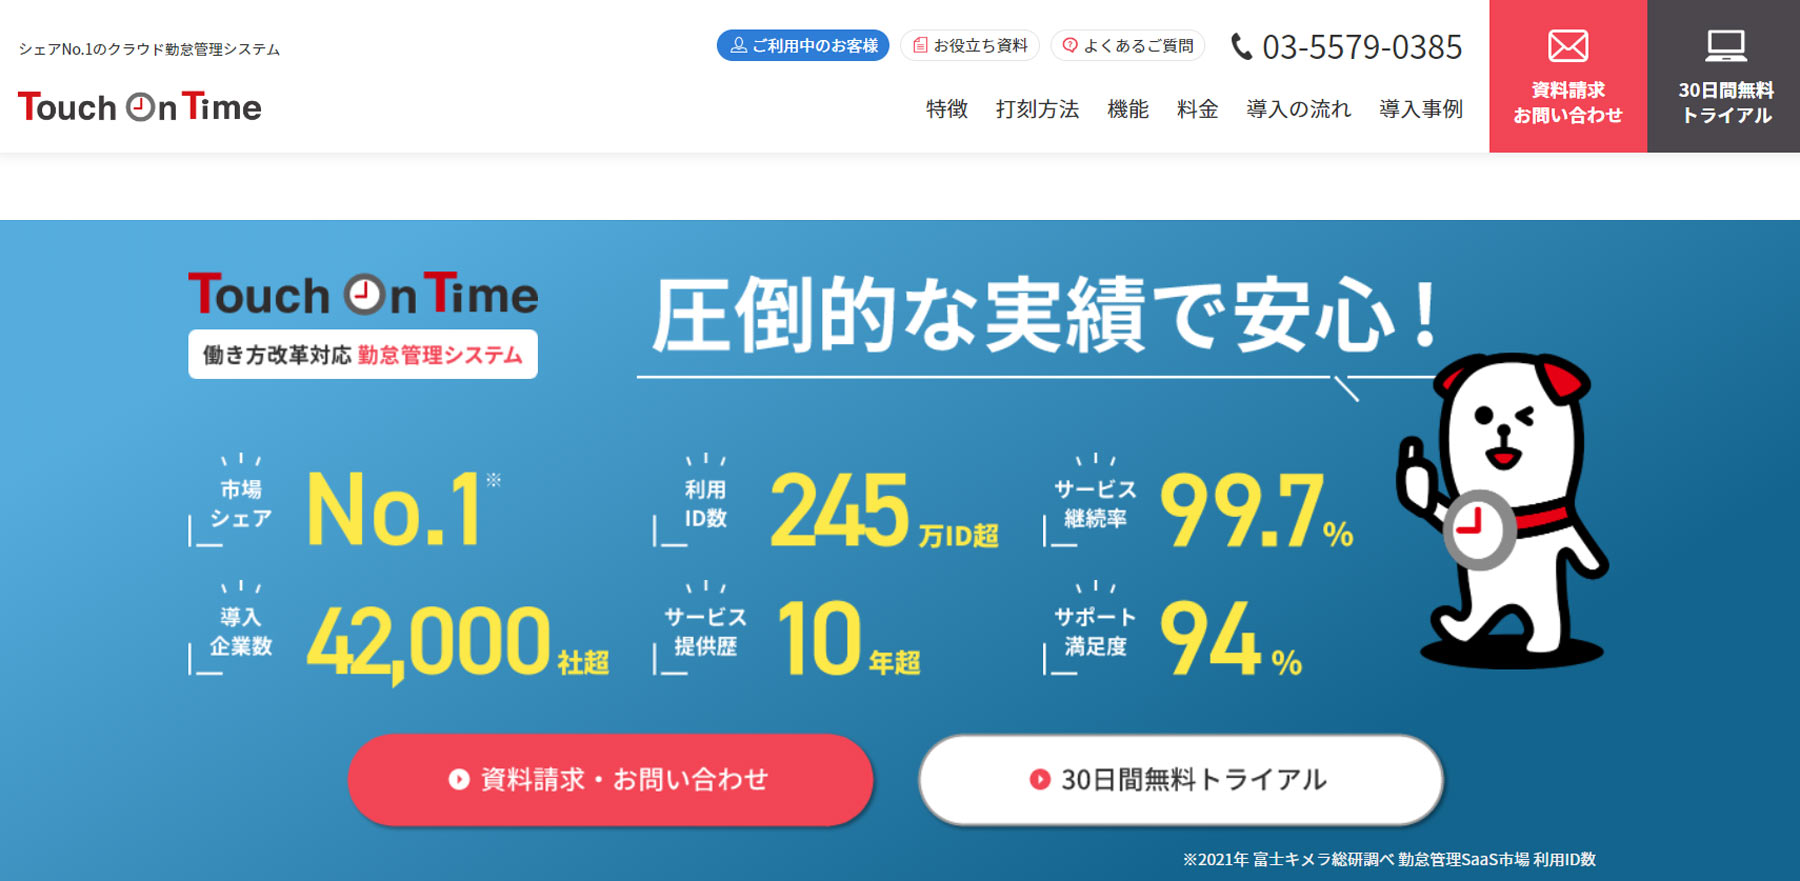 Touch On Time公式Webサイト